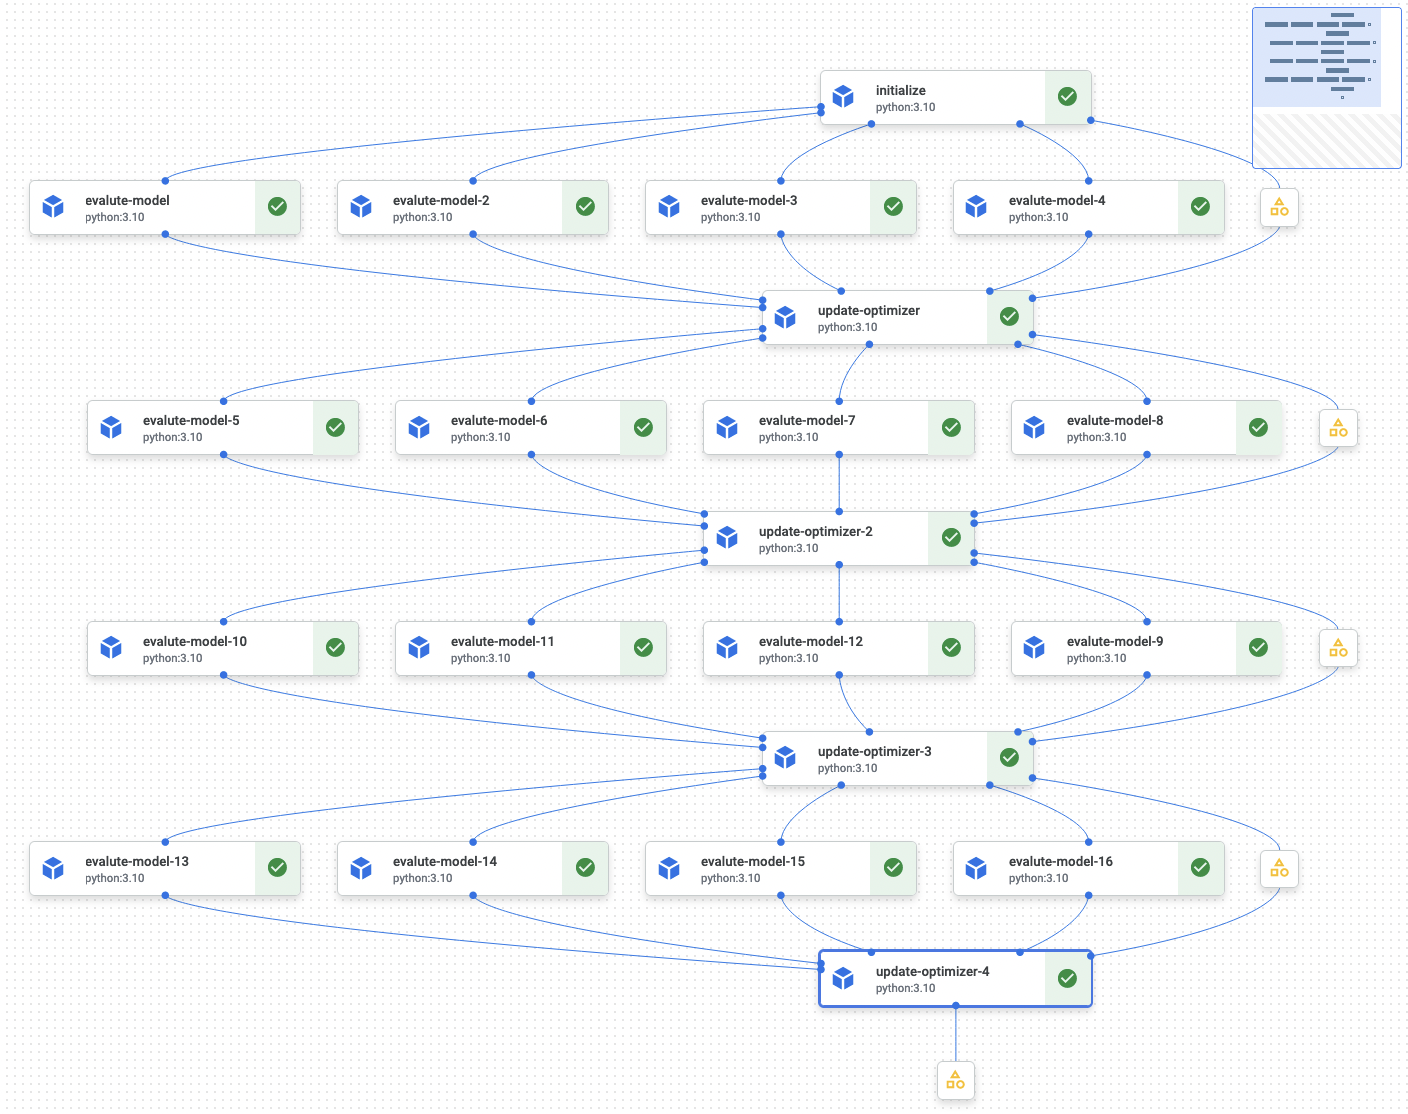 Screenshot of the execution of the Kubeflow pipeline we'll implement